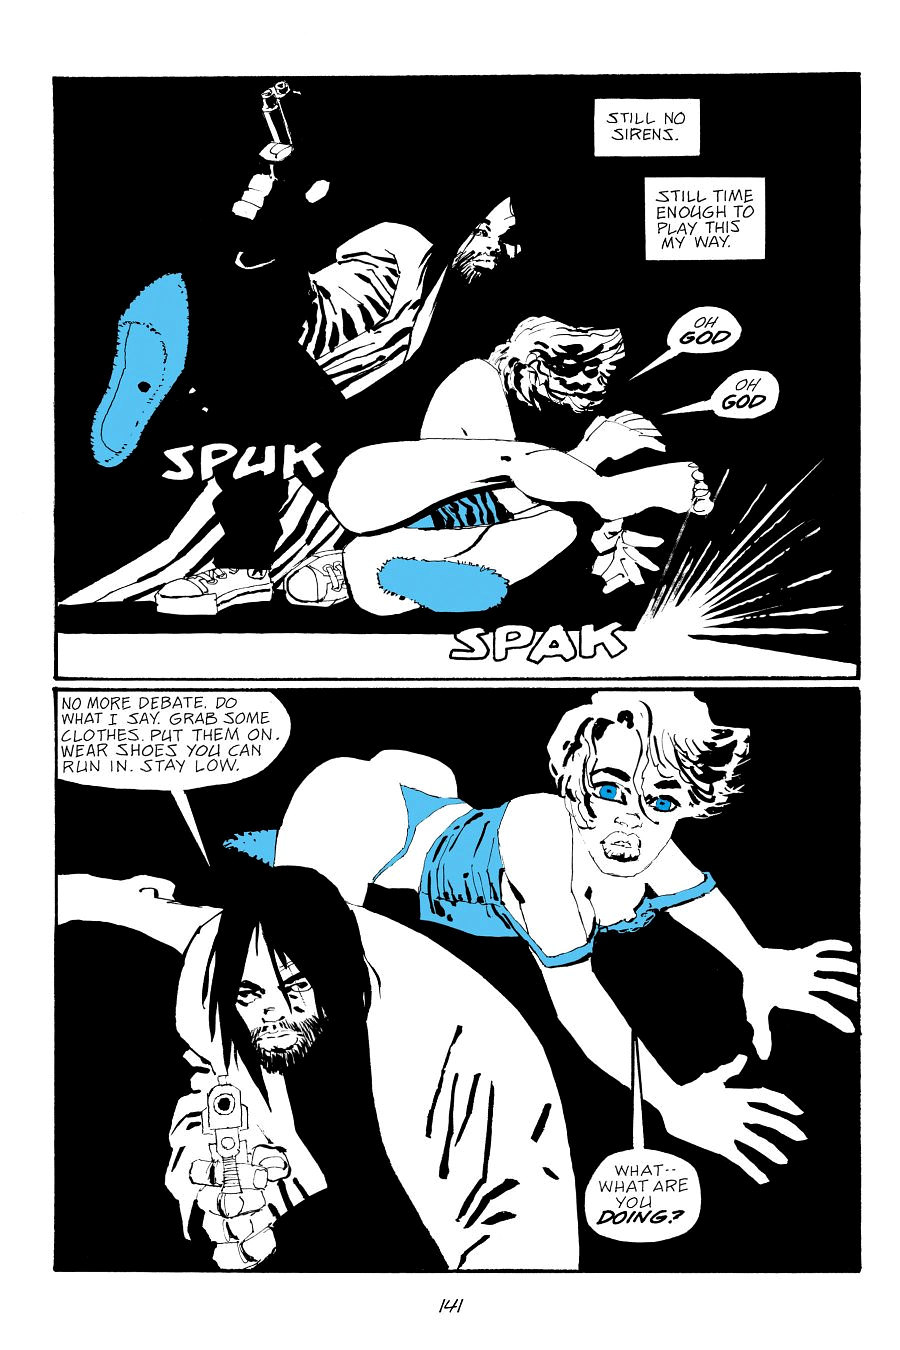 page 141 of sin city 7 hell and back